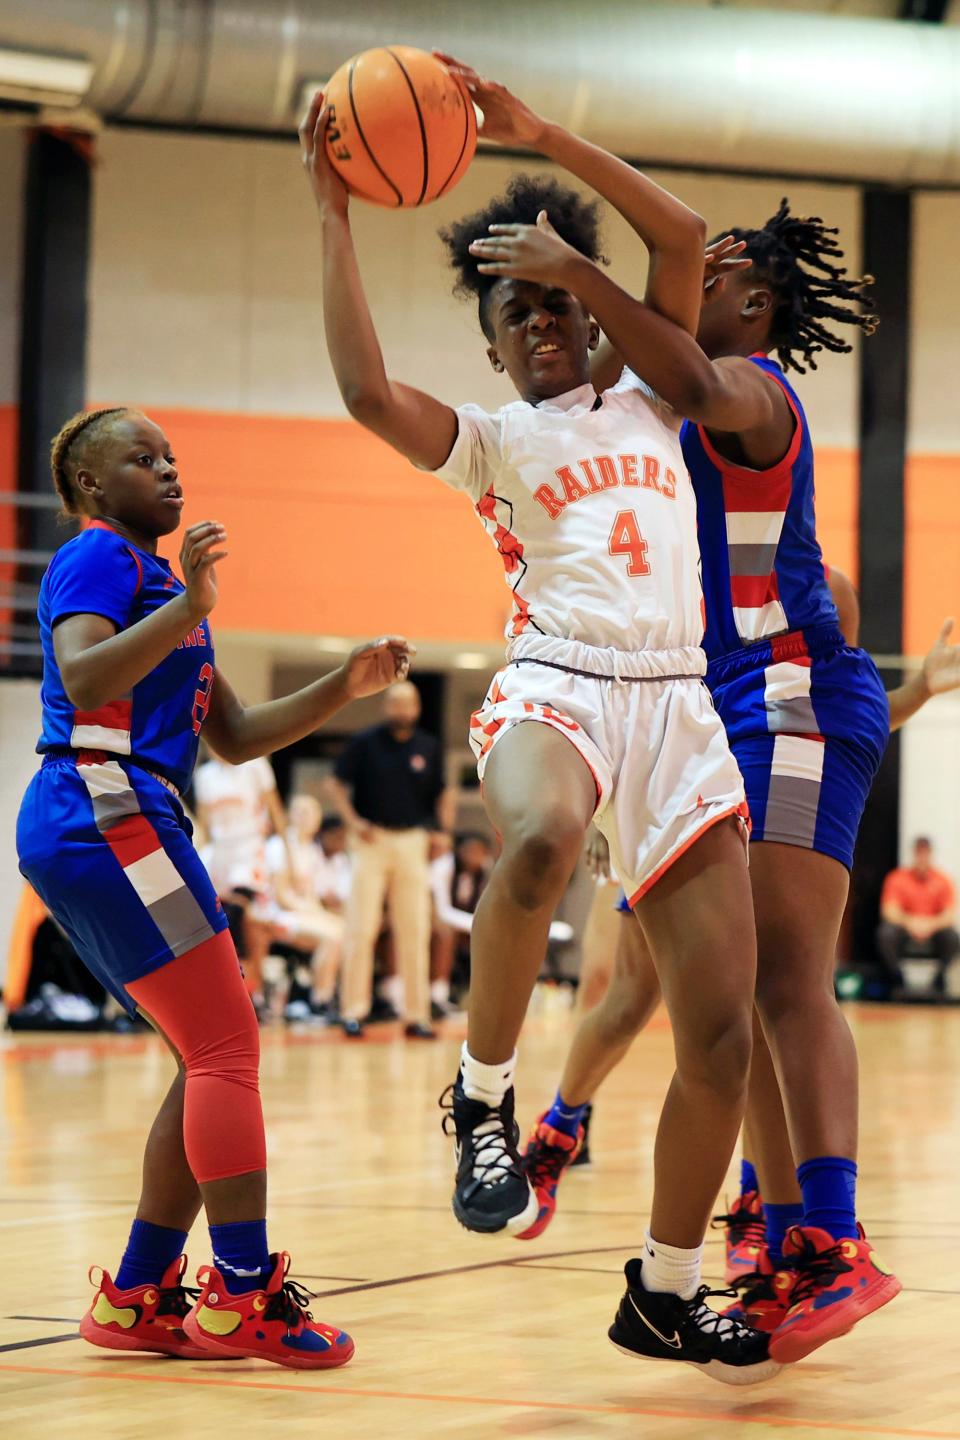 Orange Park's Eris Lester (4) is guarded by Pine Forest's Ti'yuenah Robinson (33) as Makevia House (21), left, looks on during the first quarter of a FHSAA Region 1-5A girls basketball championship game Friday, Feb. 18, 2022 at Orange Park High School in Orange Park. The Pine Forest Eagles knocked off the Orange Park Raiders 70-55. [Corey Perrine/Florida Times-Union]